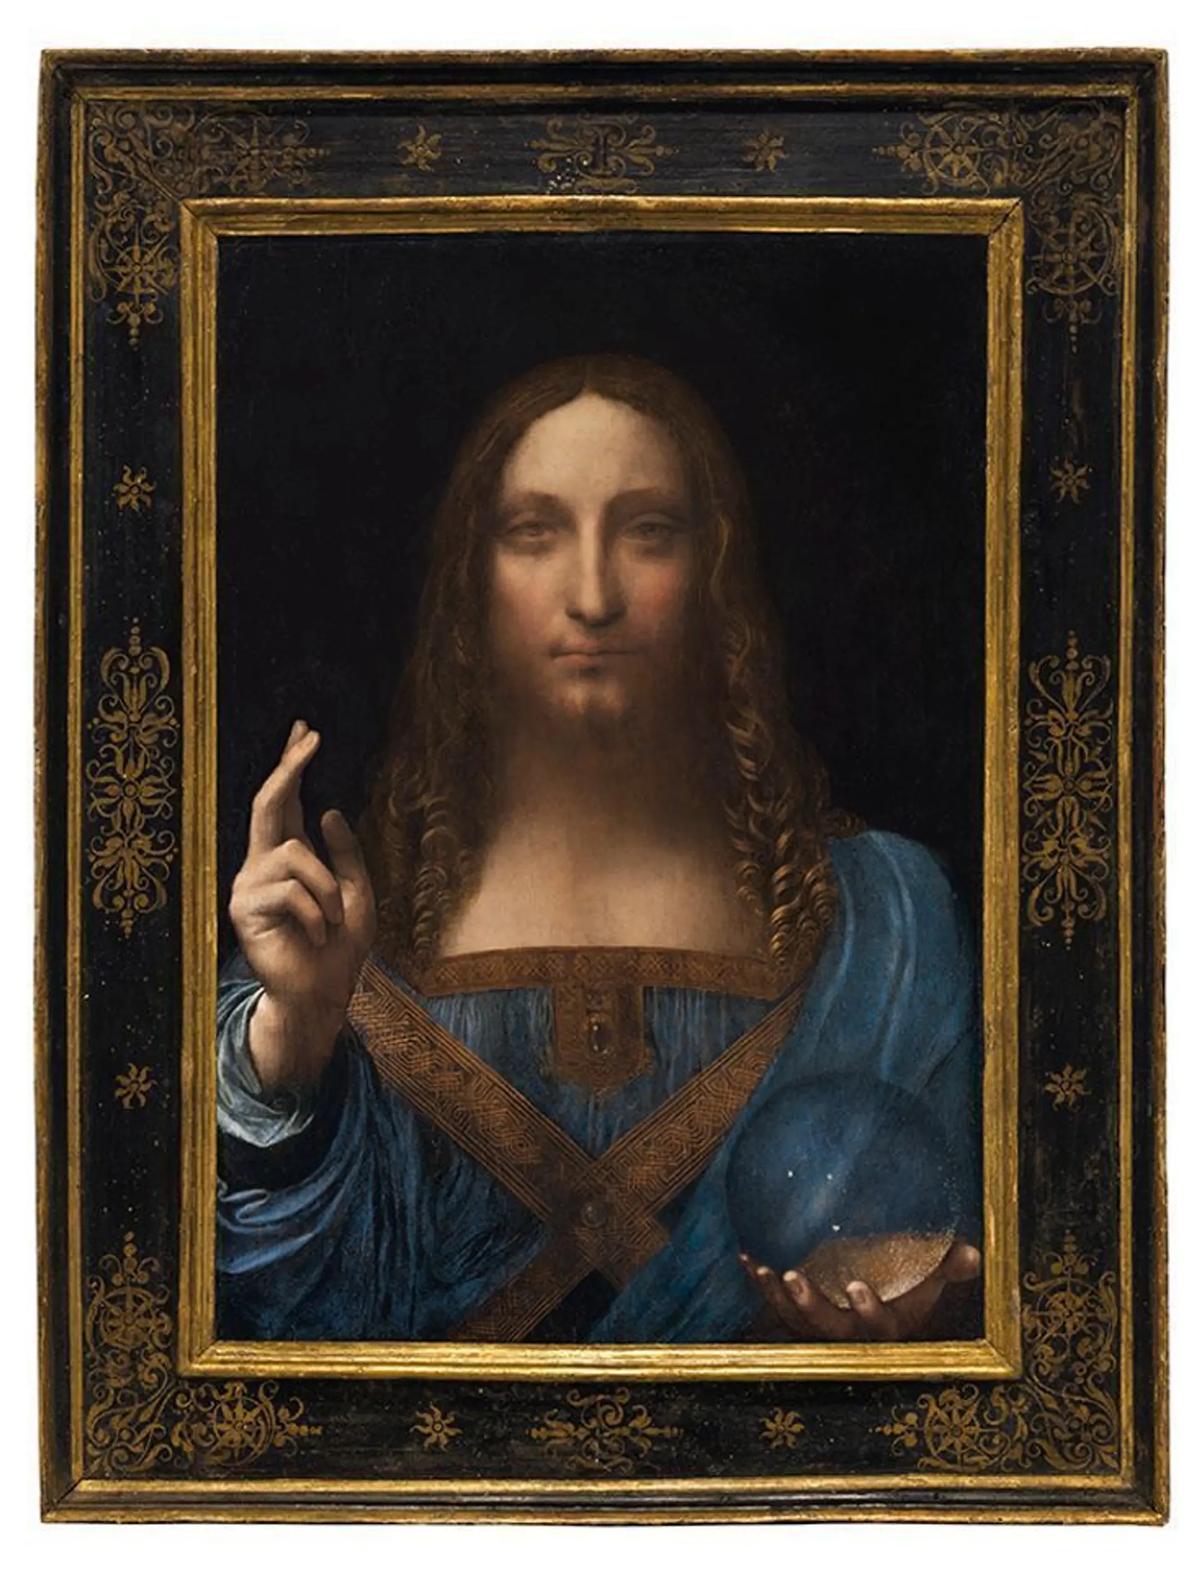 Leonardo's Salvator Mundi, which sold at Christie's in 2017 for $450m, has been categorised as “attributed works, workshop or authorised and supervised by Leonardo”, in the Prado's exhibition catalogue